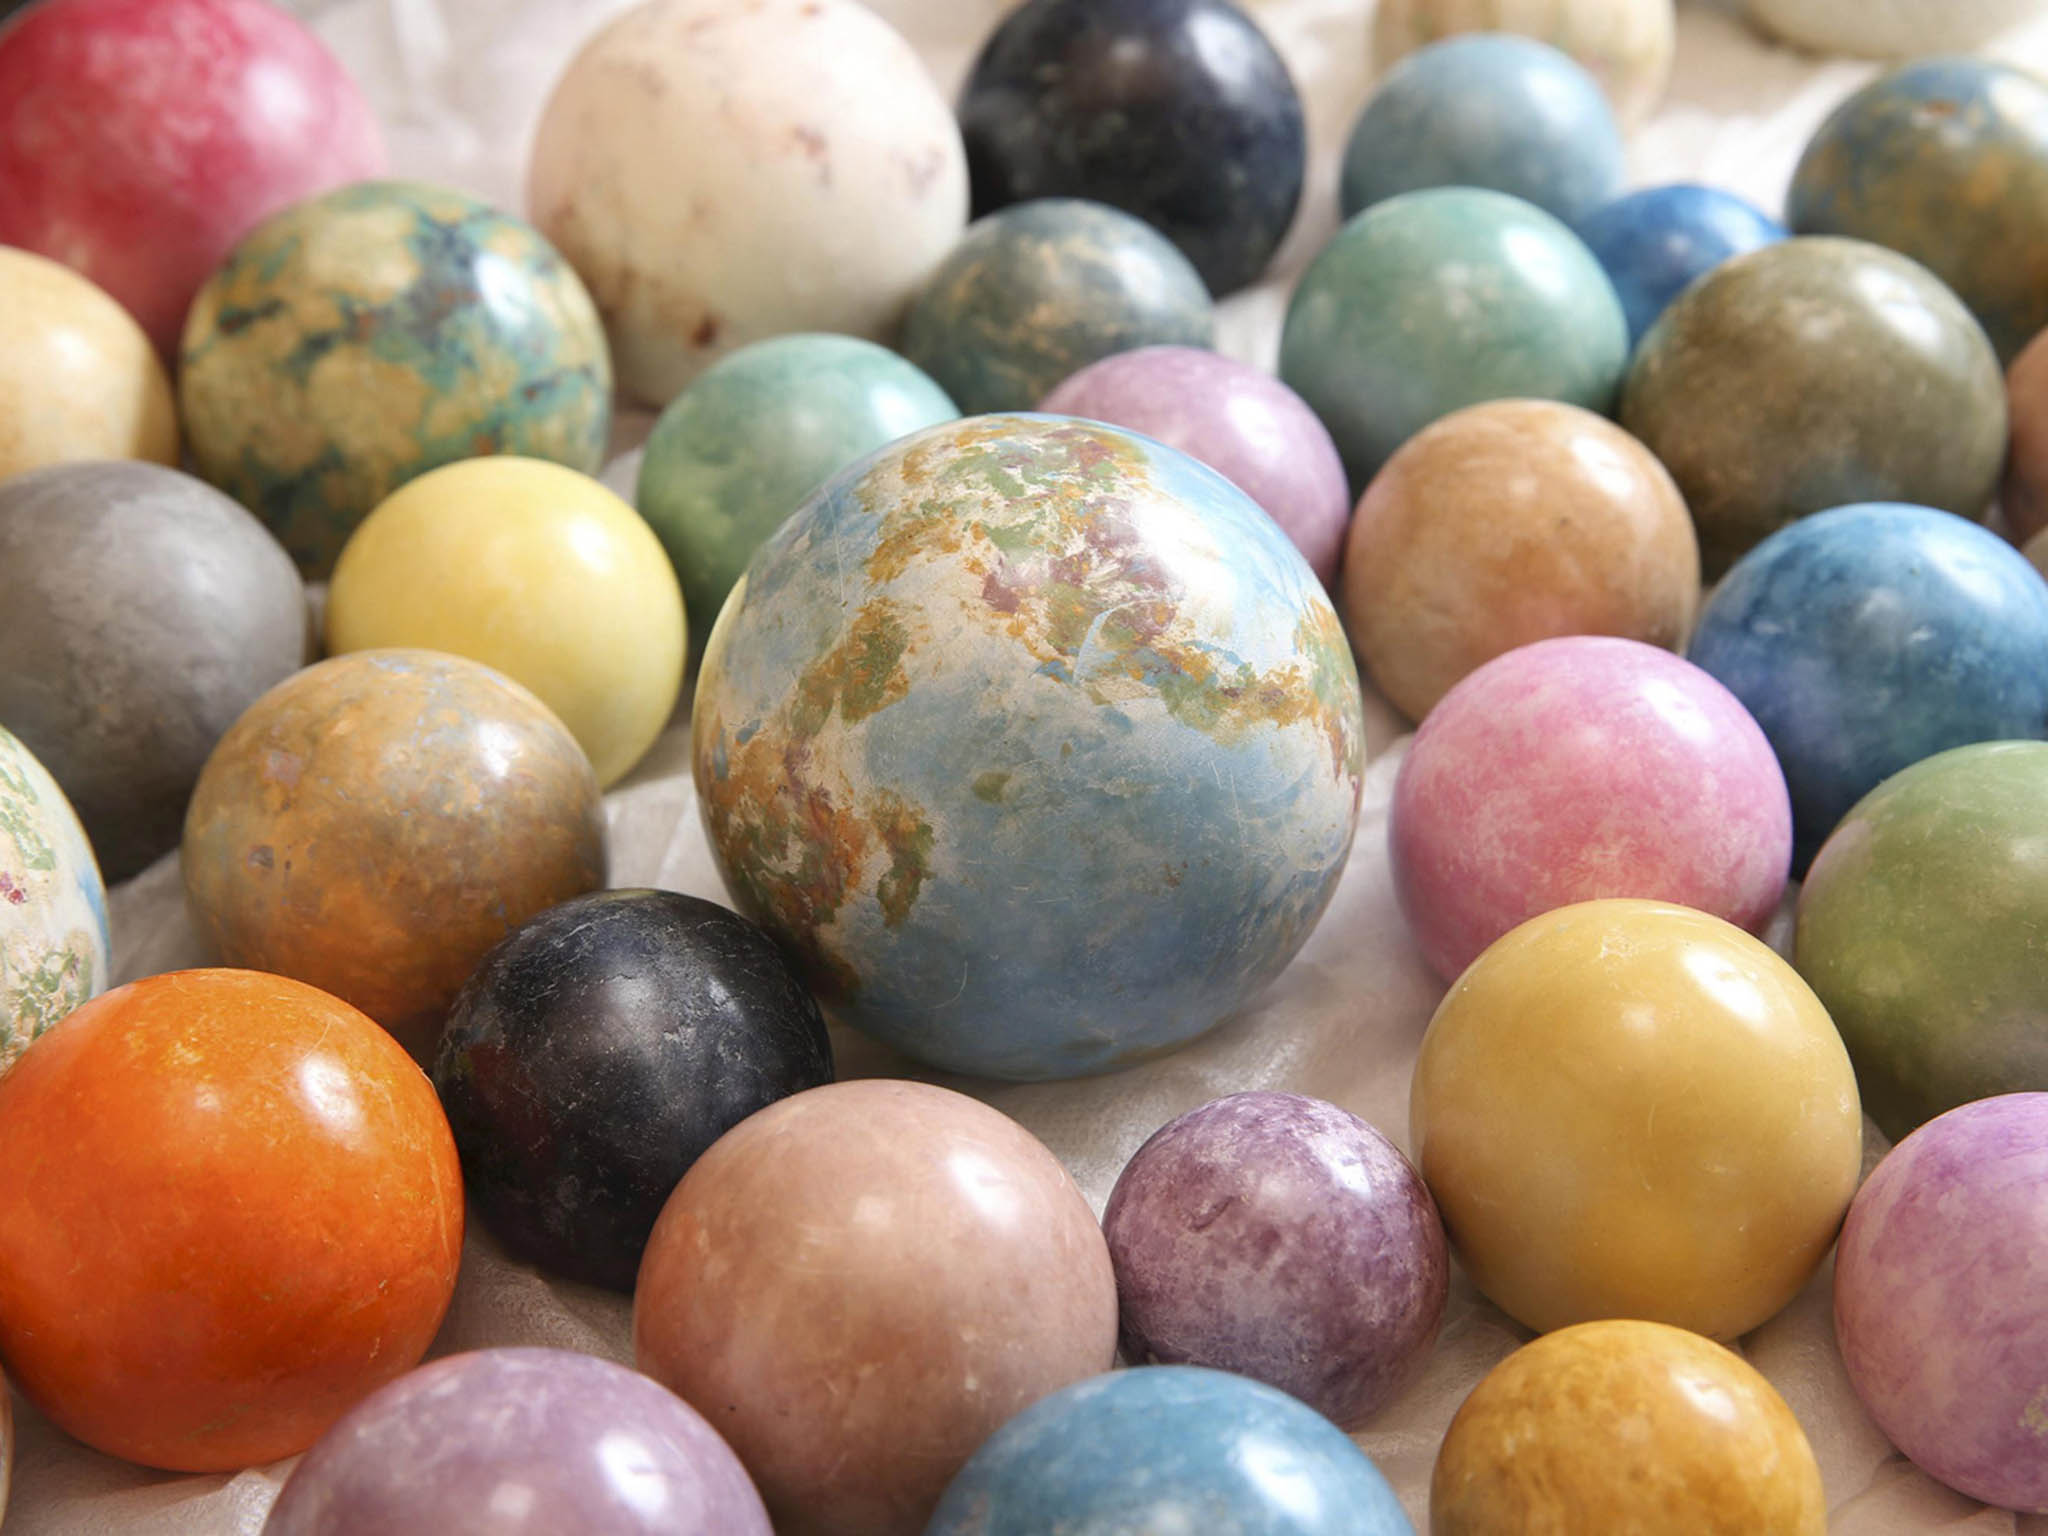 Colorful dorodango mudballs are displayed. The one in the middle is painted with several colors to look like the Earth